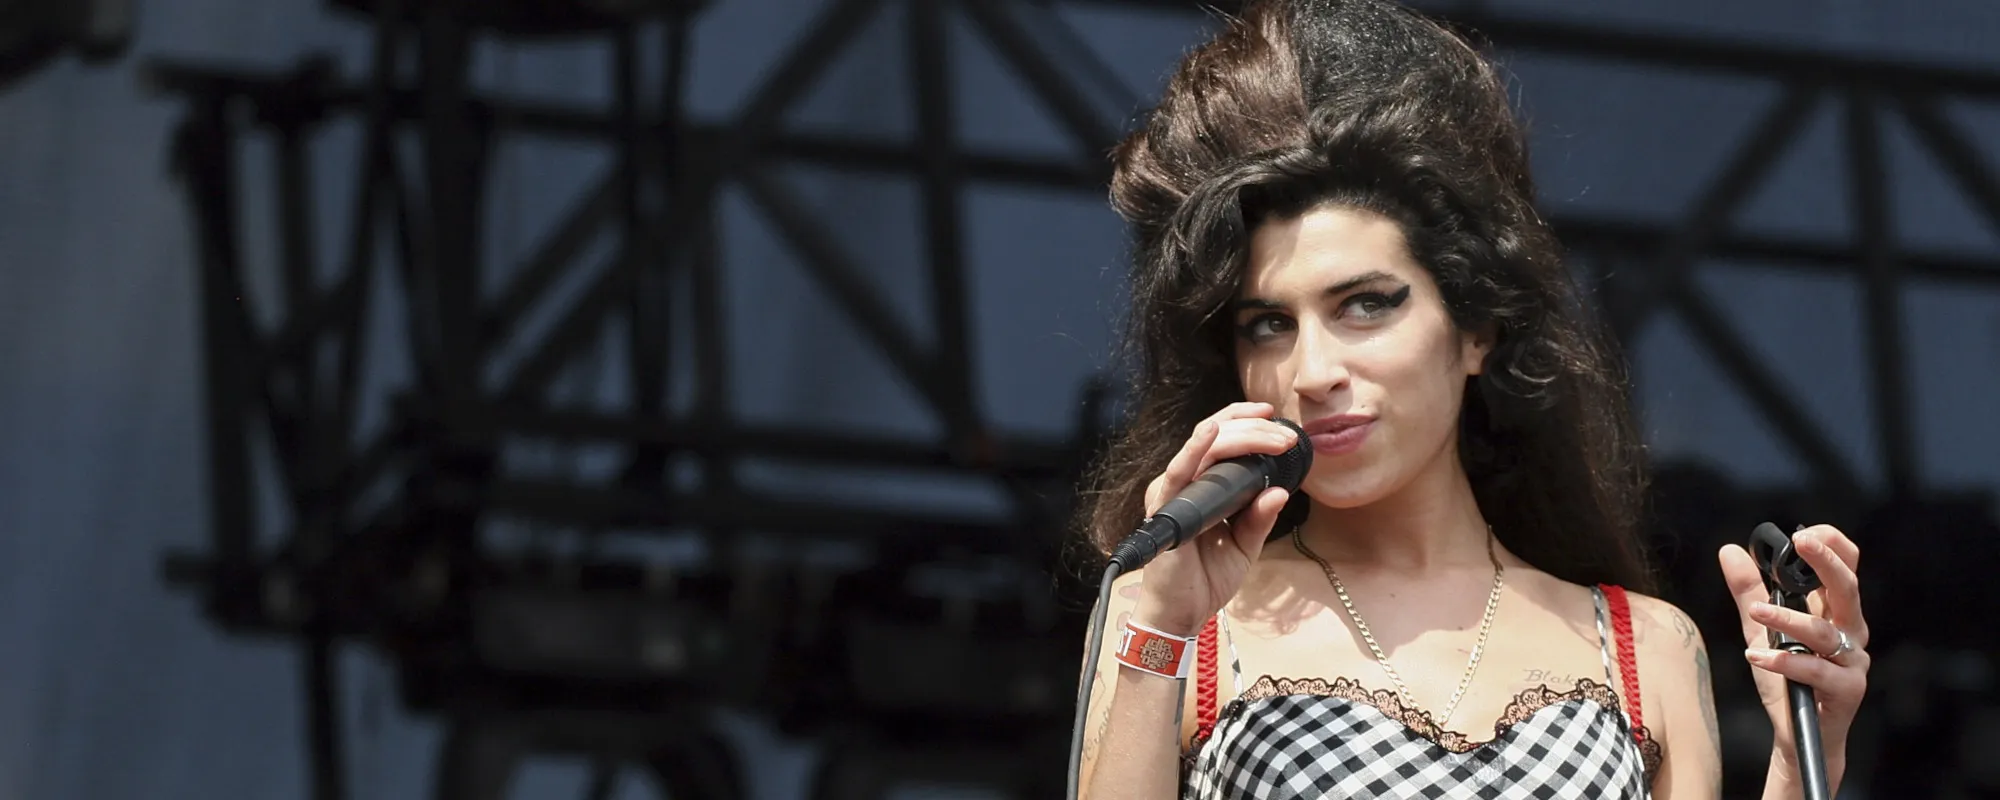 Amy Winehouse Biopic in Works with ‘Fifty Shades of Grey’ Director Sam Taylor-Johnson